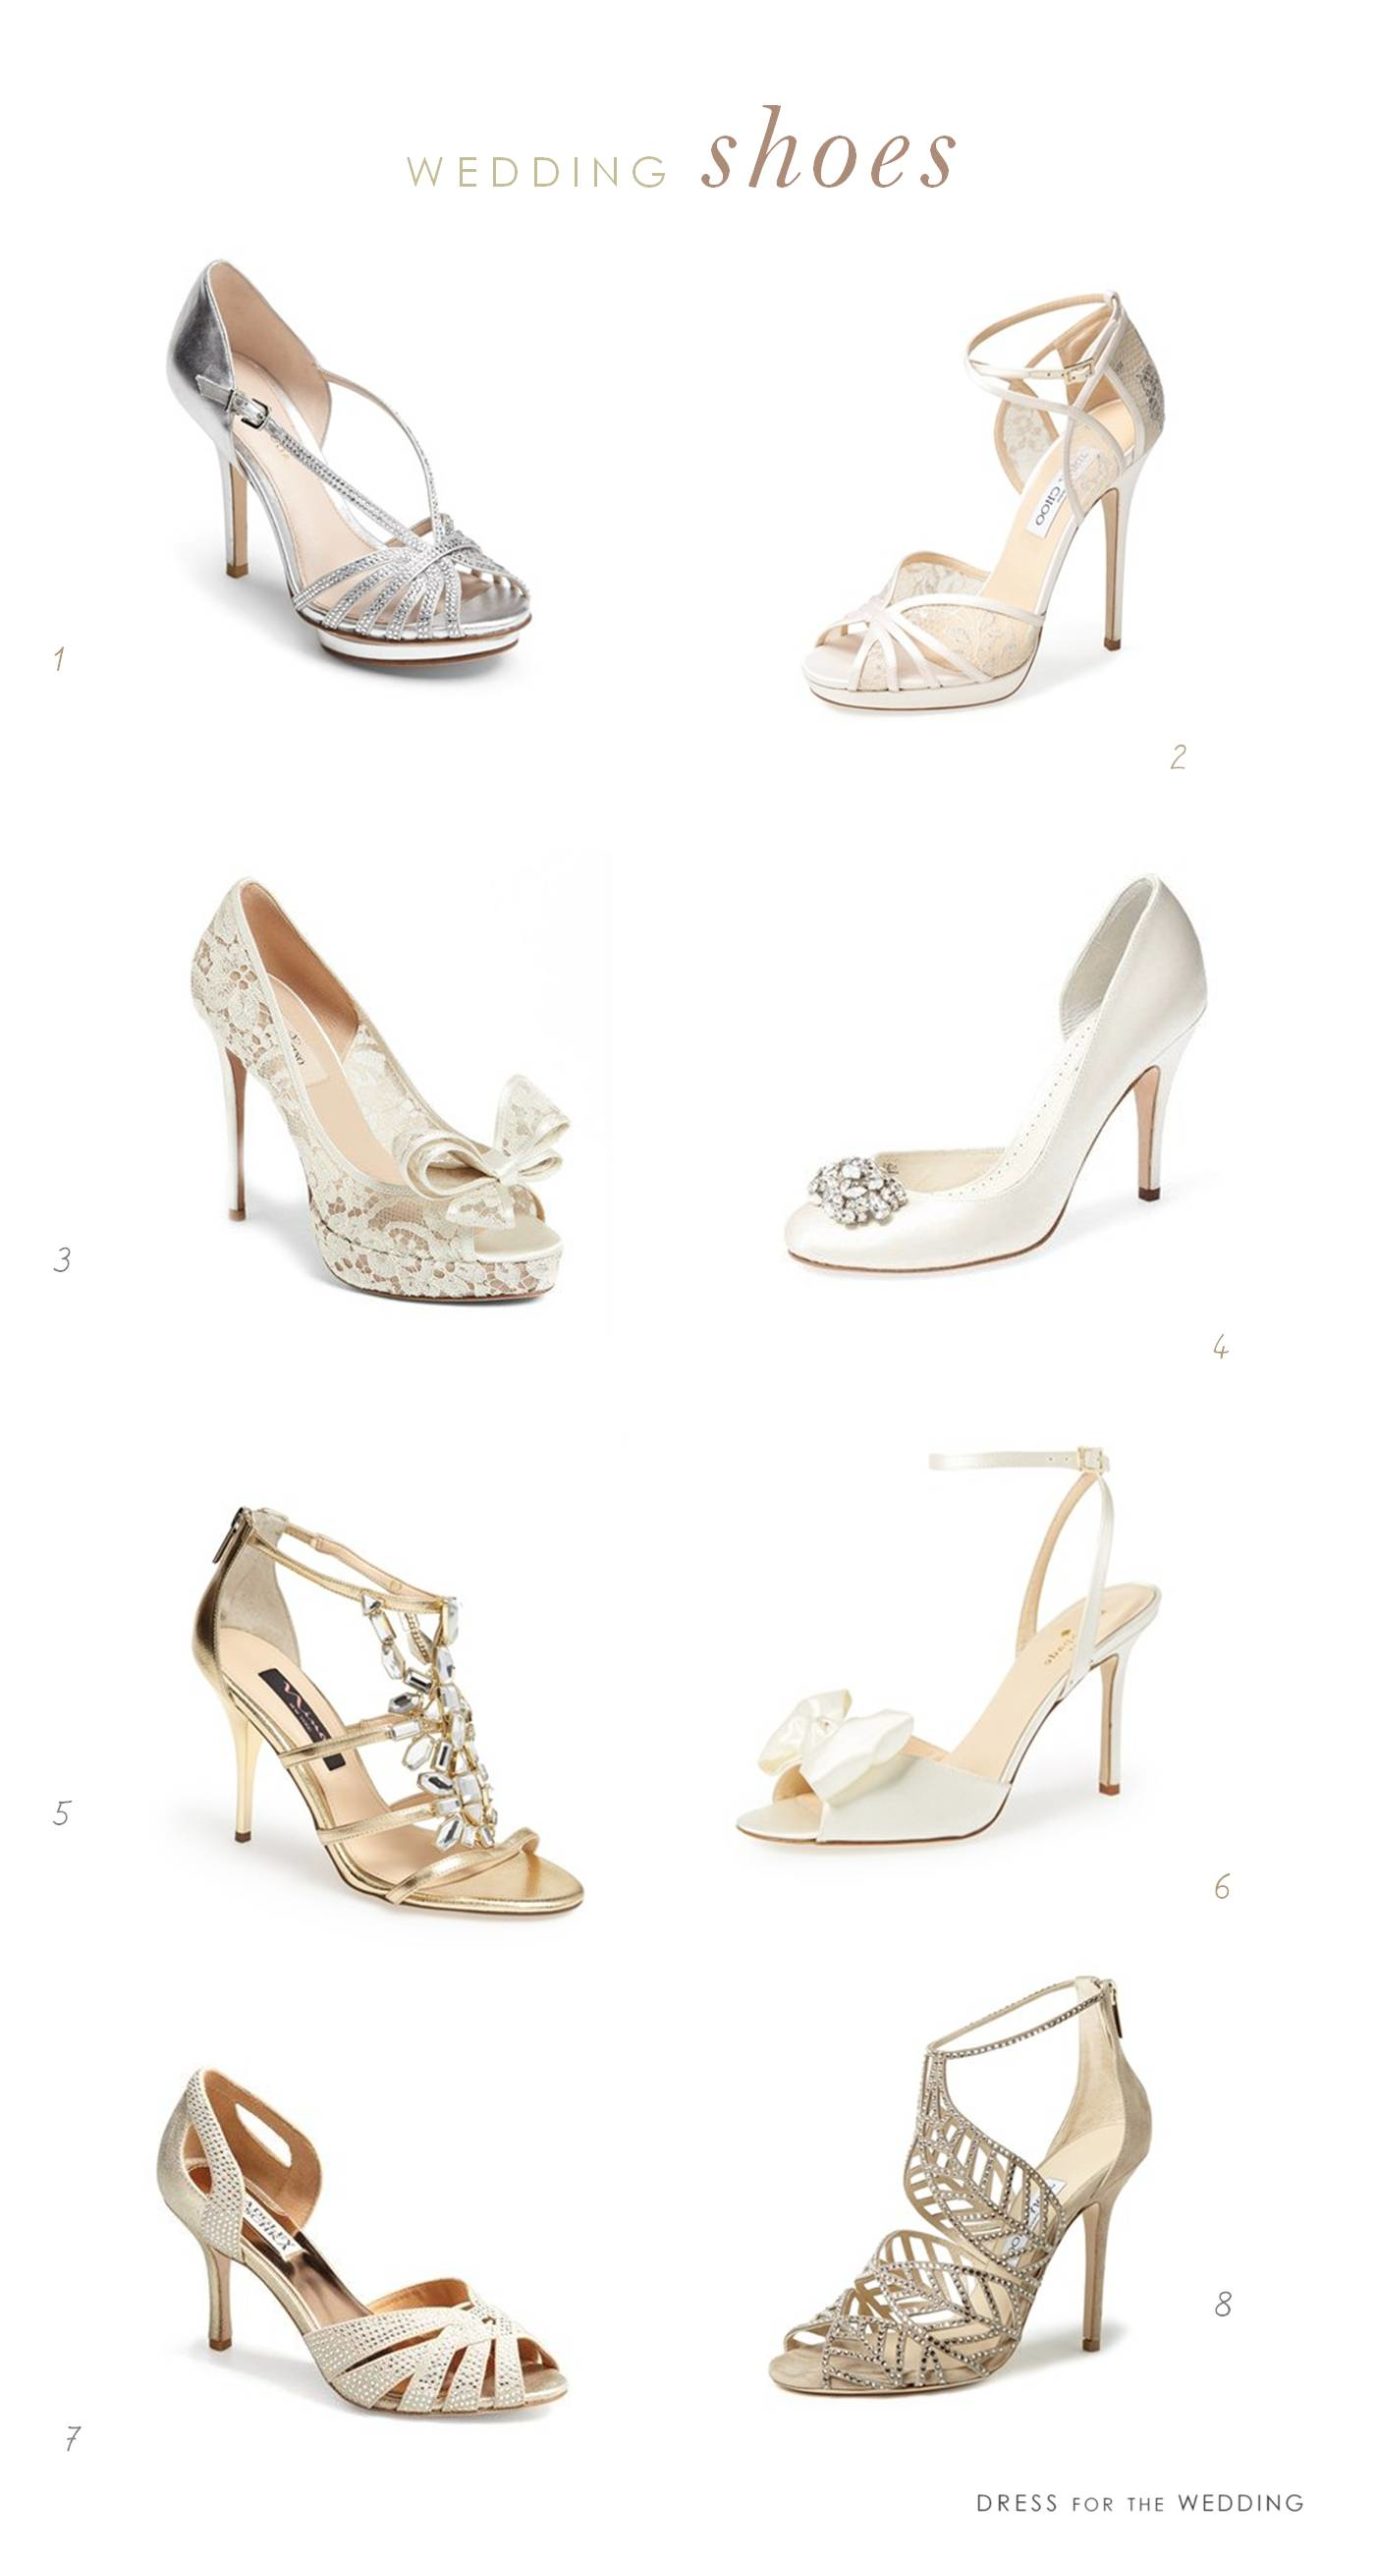 Bridal Shoes in Ivory or Coloured * Robin